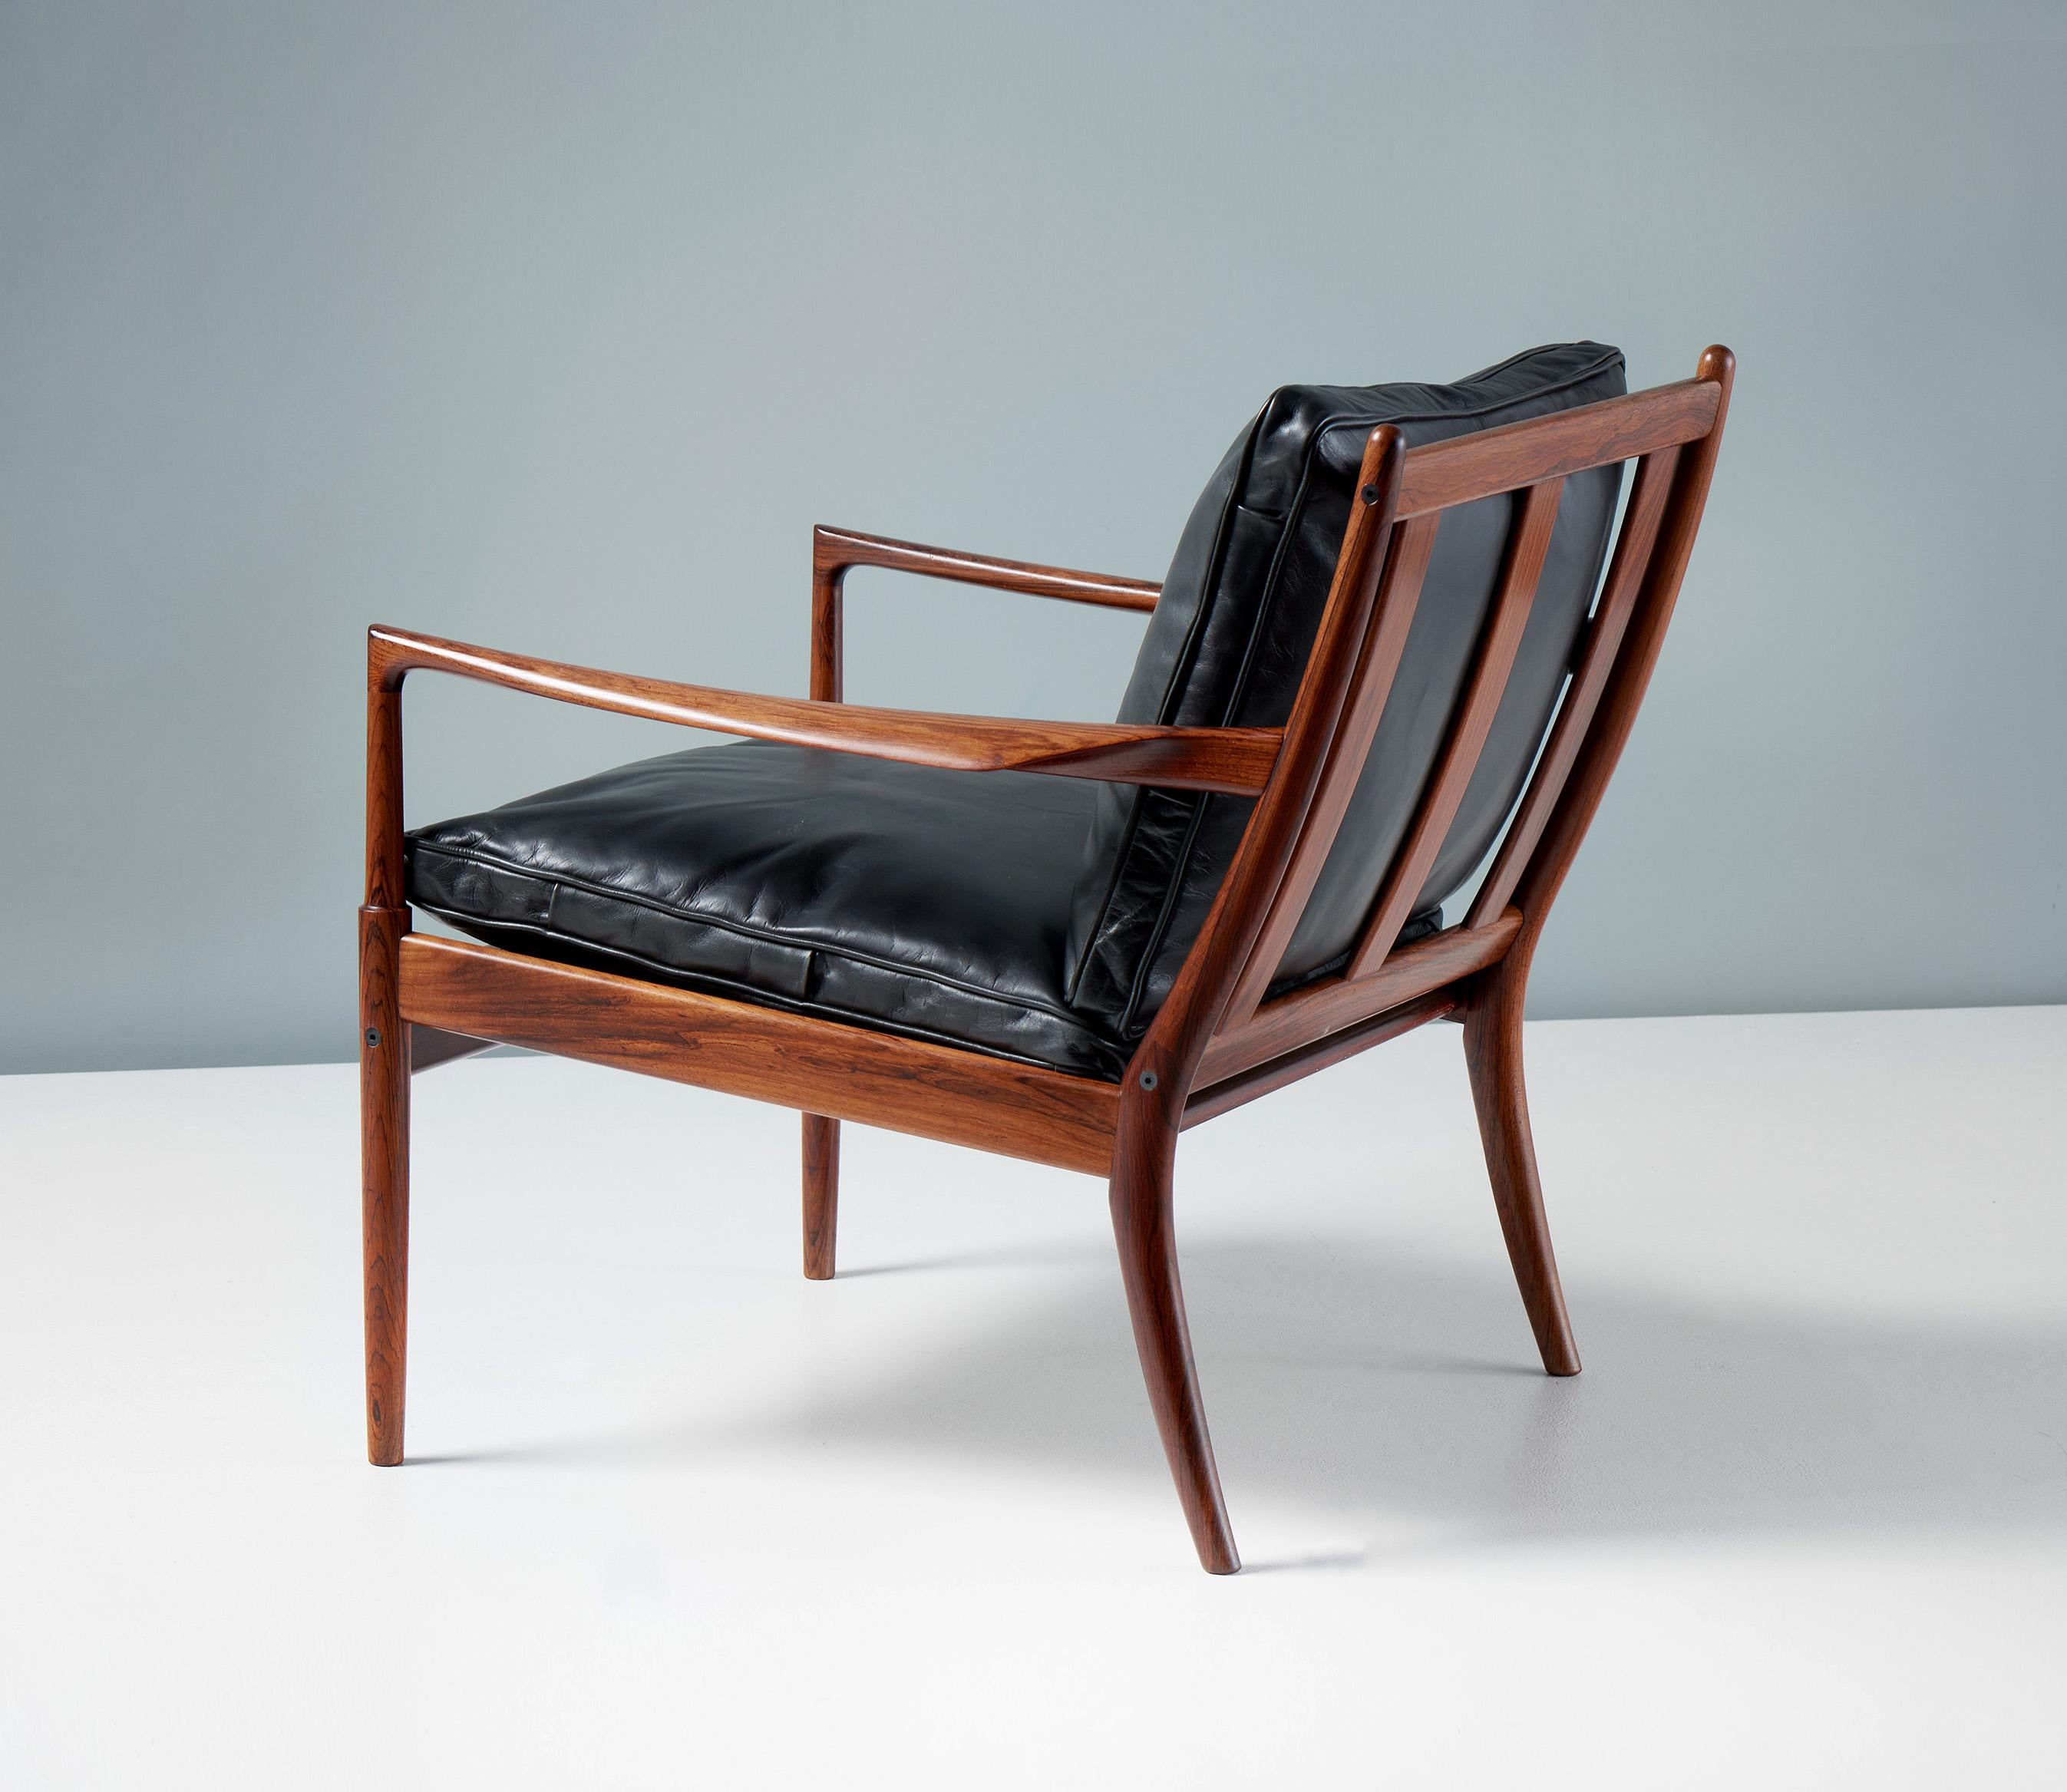 Ib Kofod-Larsen Rosewood Samso Chairs, c1950s In Excellent Condition For Sale In London, GB